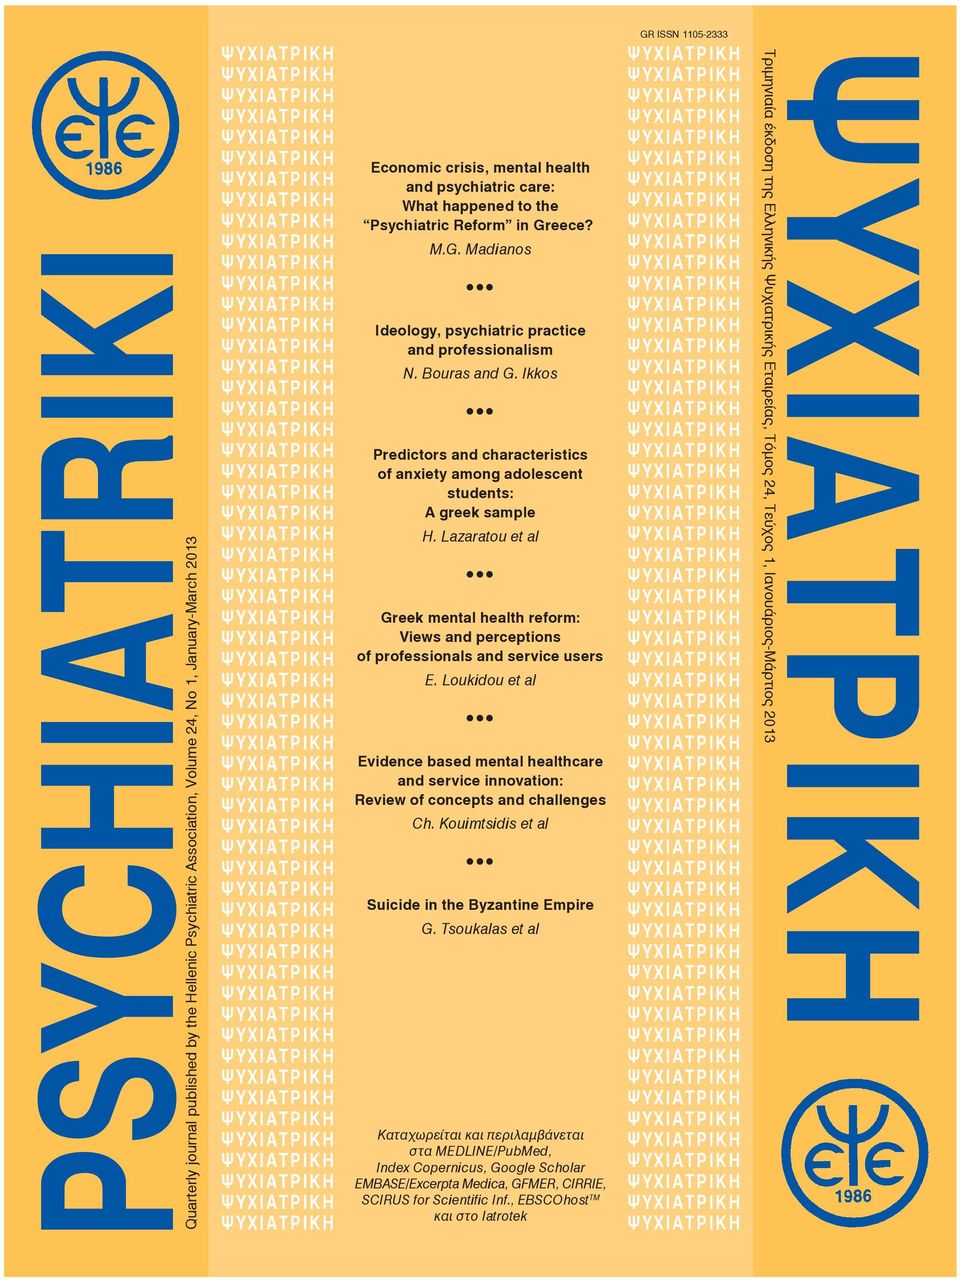 Ikkos Predictors and characteristics of anxiety among adolescent students: A greek sample H. Lazaratou et al Greek mental health reform: Views and perceptions of professionals and service users E.